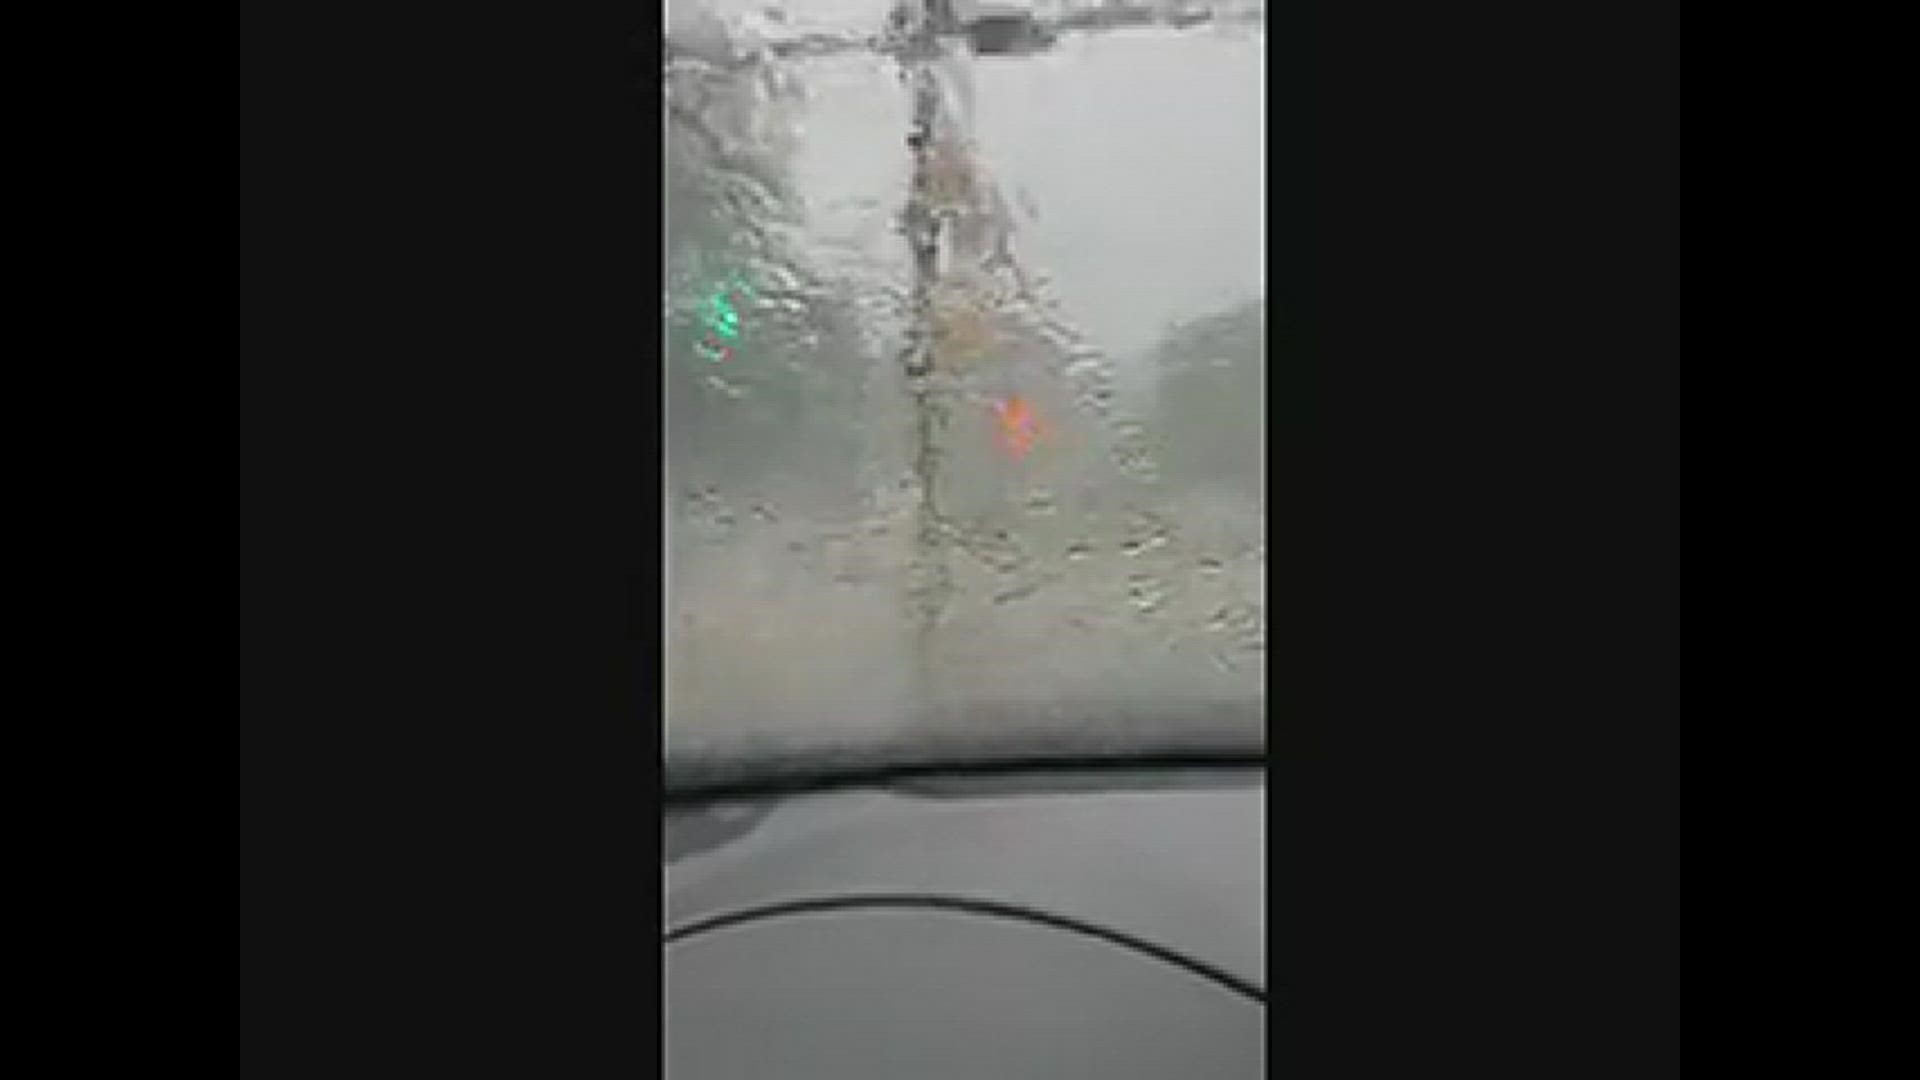 Rain coming down in Mooresville, NC
Credit: WCNC Charlotte viewer